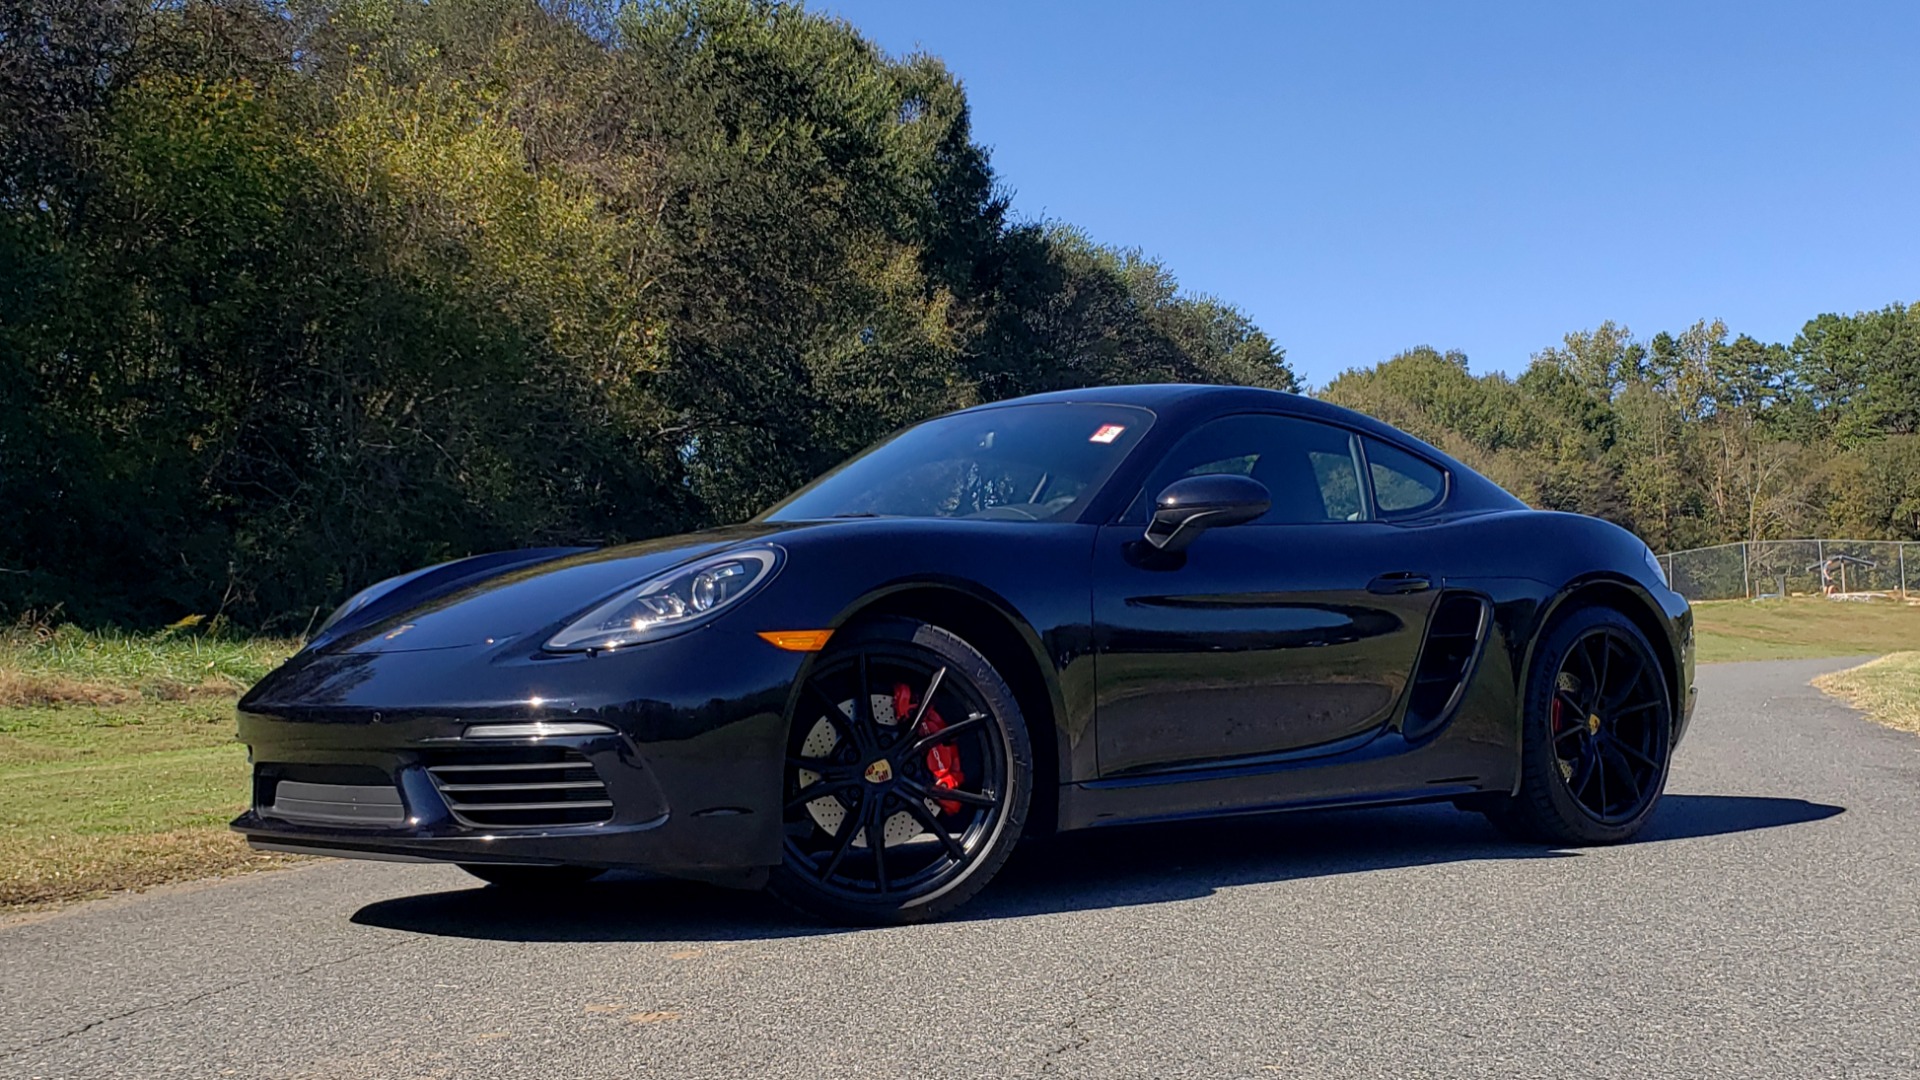 Used 2019 Porsche 718 CAYMAN S COUPE / PDK TRANS / LCA / BOSE / HTD STS / LIGHT DESIGN PKG for sale Sold at Formula Imports in Charlotte NC 28227 1